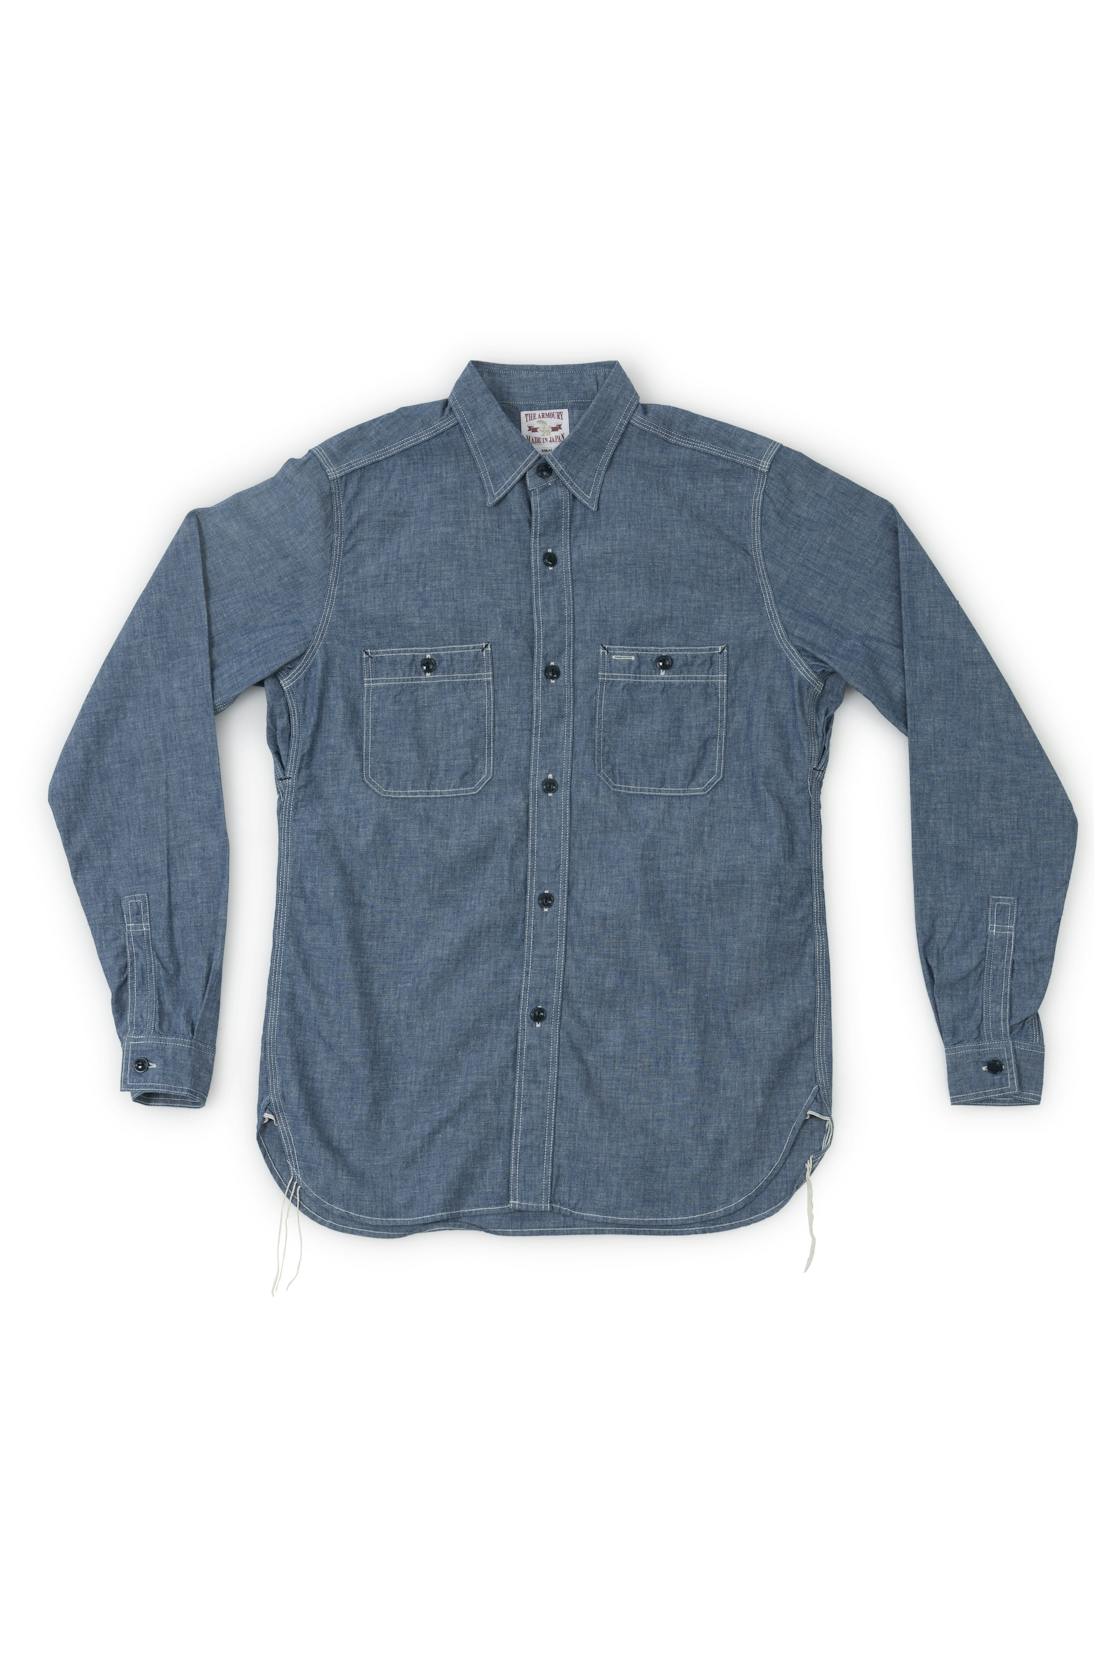 The Real McCoy's X The Armoury Blue Cotton Chambray Shirt